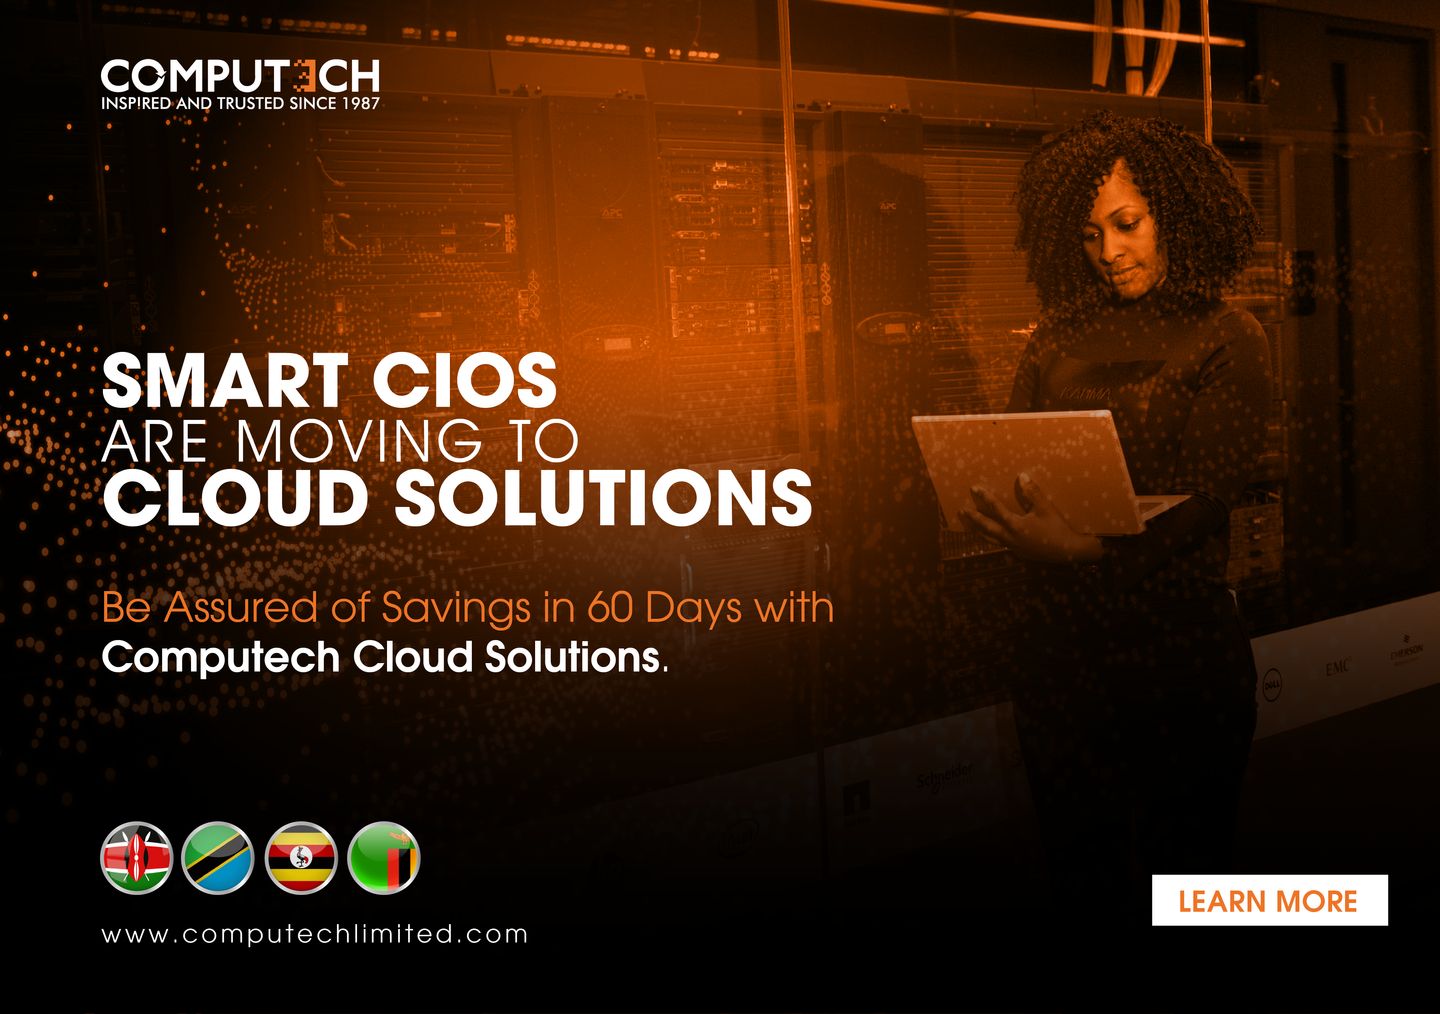 Be Assured of Savings in 60 Days with Computech Cloud Solutions.